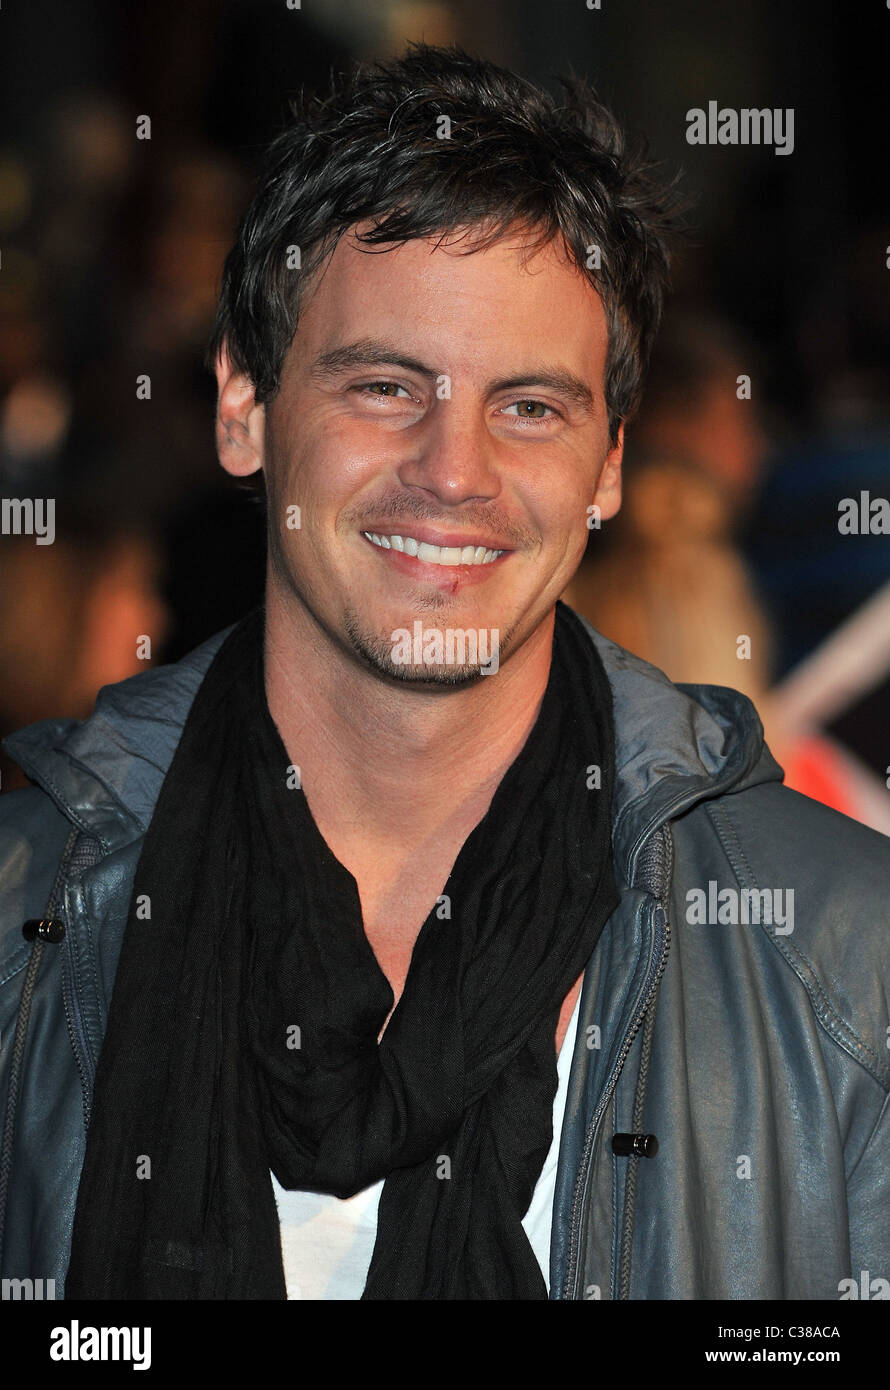 Guest Fast & Furious - UK film premiere held at the Vue West. London, England - 19.03.09 : Stock Photo